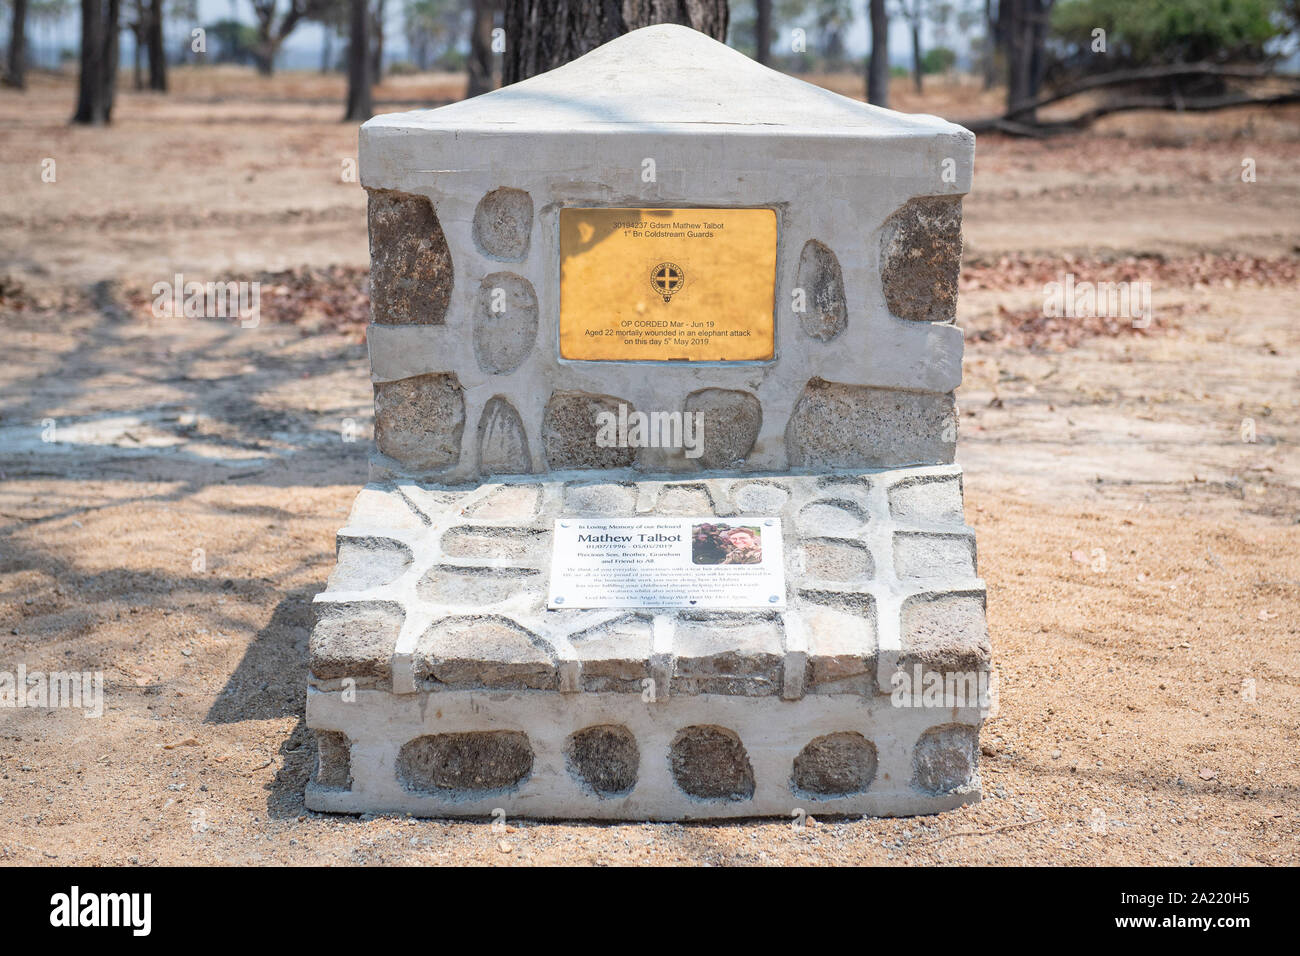 The memorial stone for Guardsman Mathew Talbot of the Coldstream Guards at the Liwonde National Park in Malawi. Guardsman Talbot lost his life in May 2019 on a joint anti-poaching patrol with local park rangers. Stock Photo